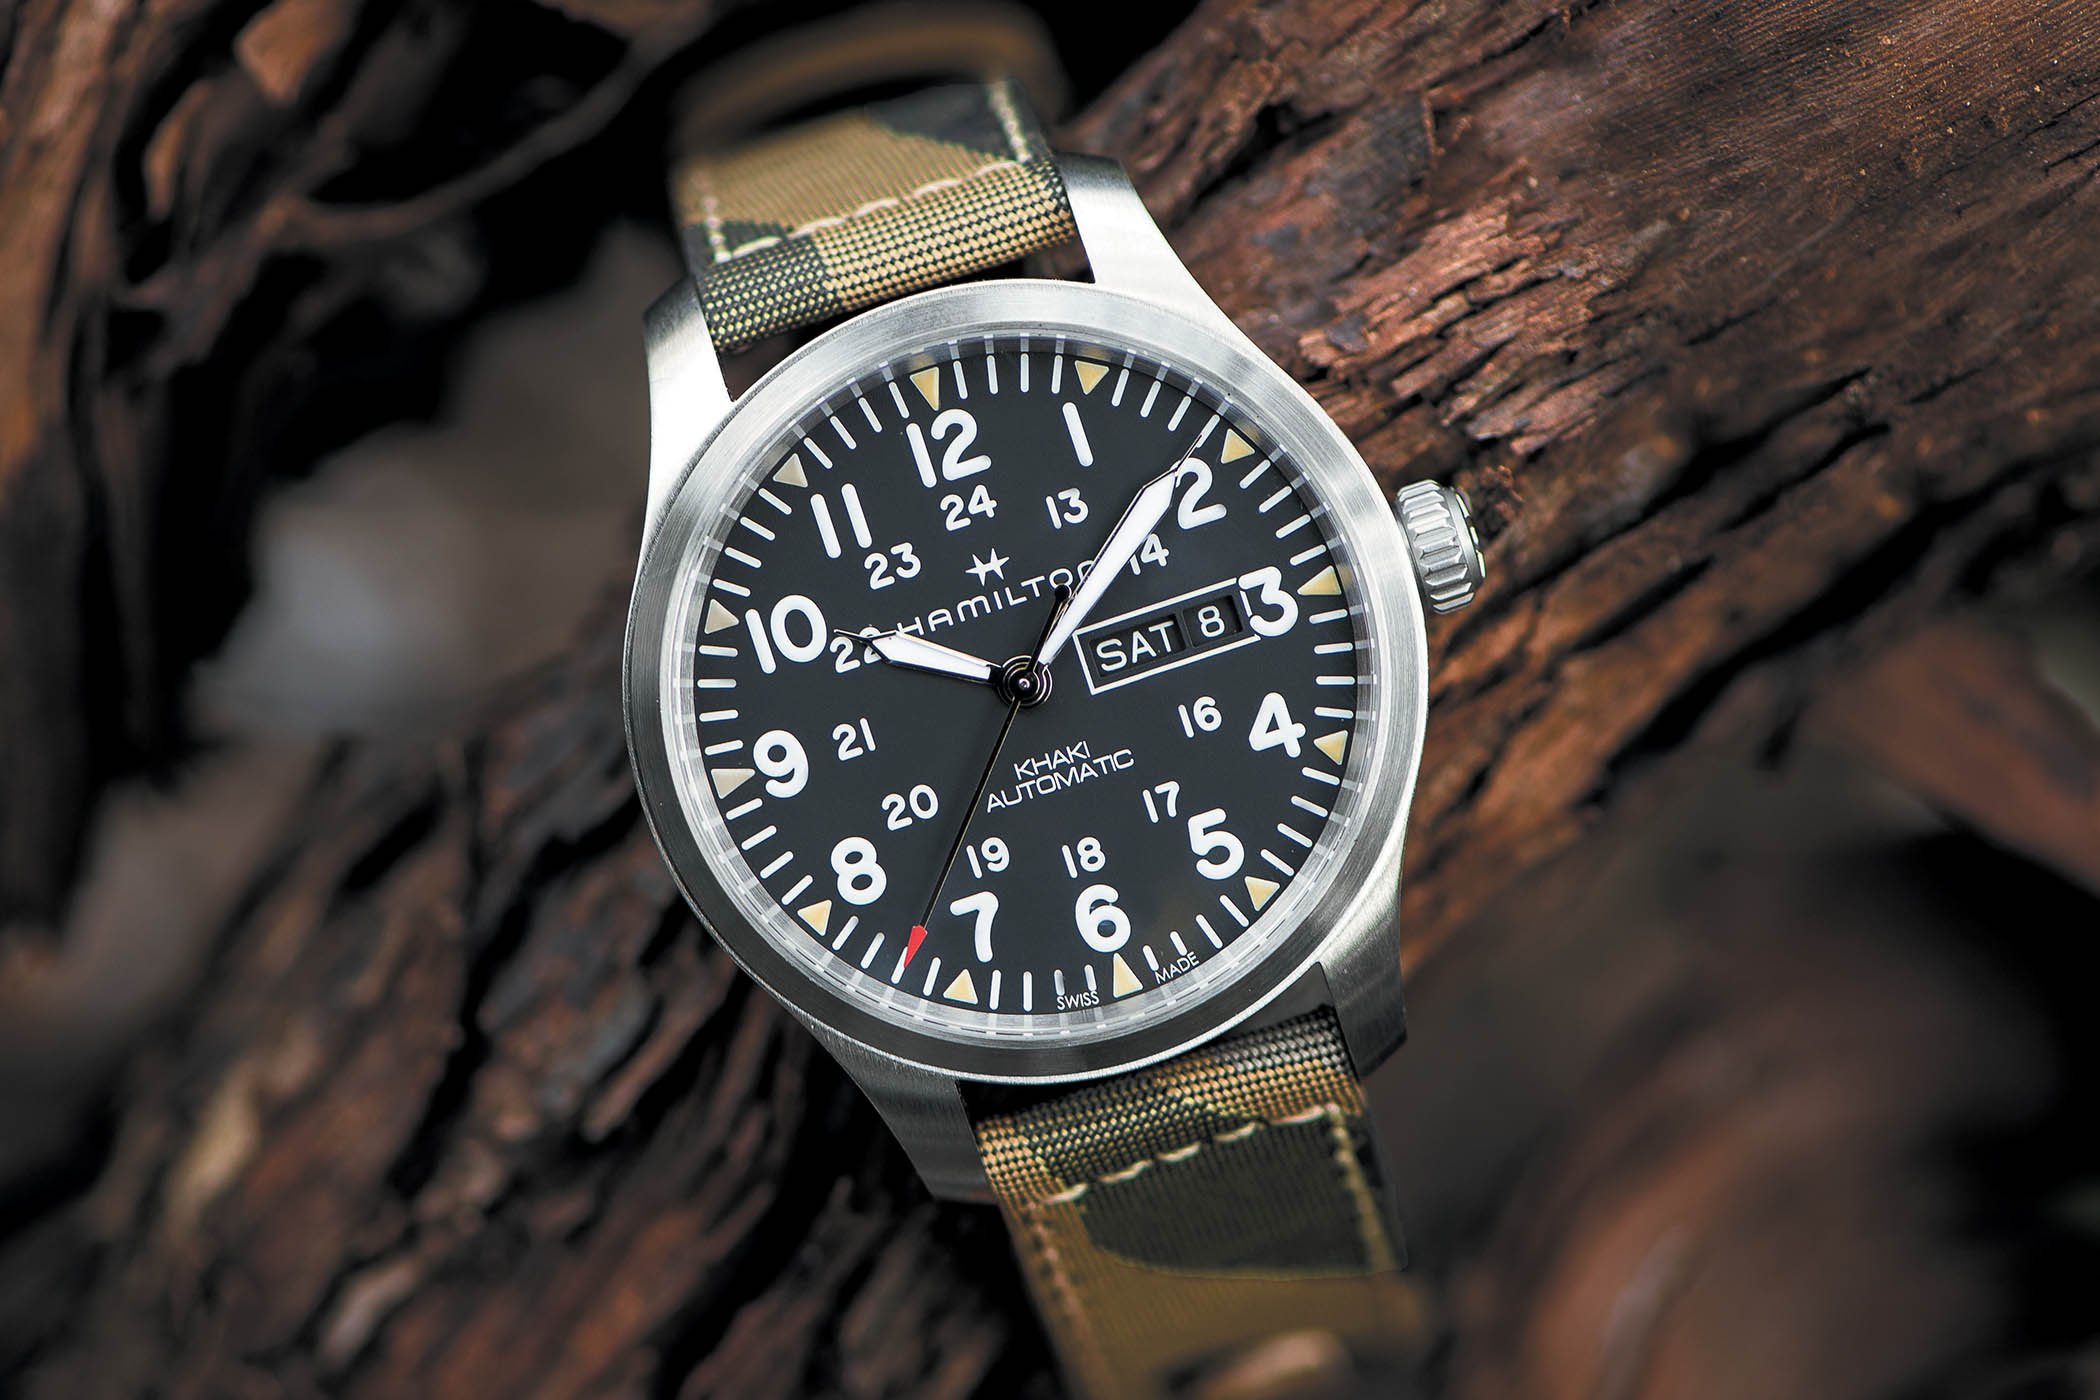 Introducing - Hamilton Khaki Field Day-Date 42mm “Camouflage